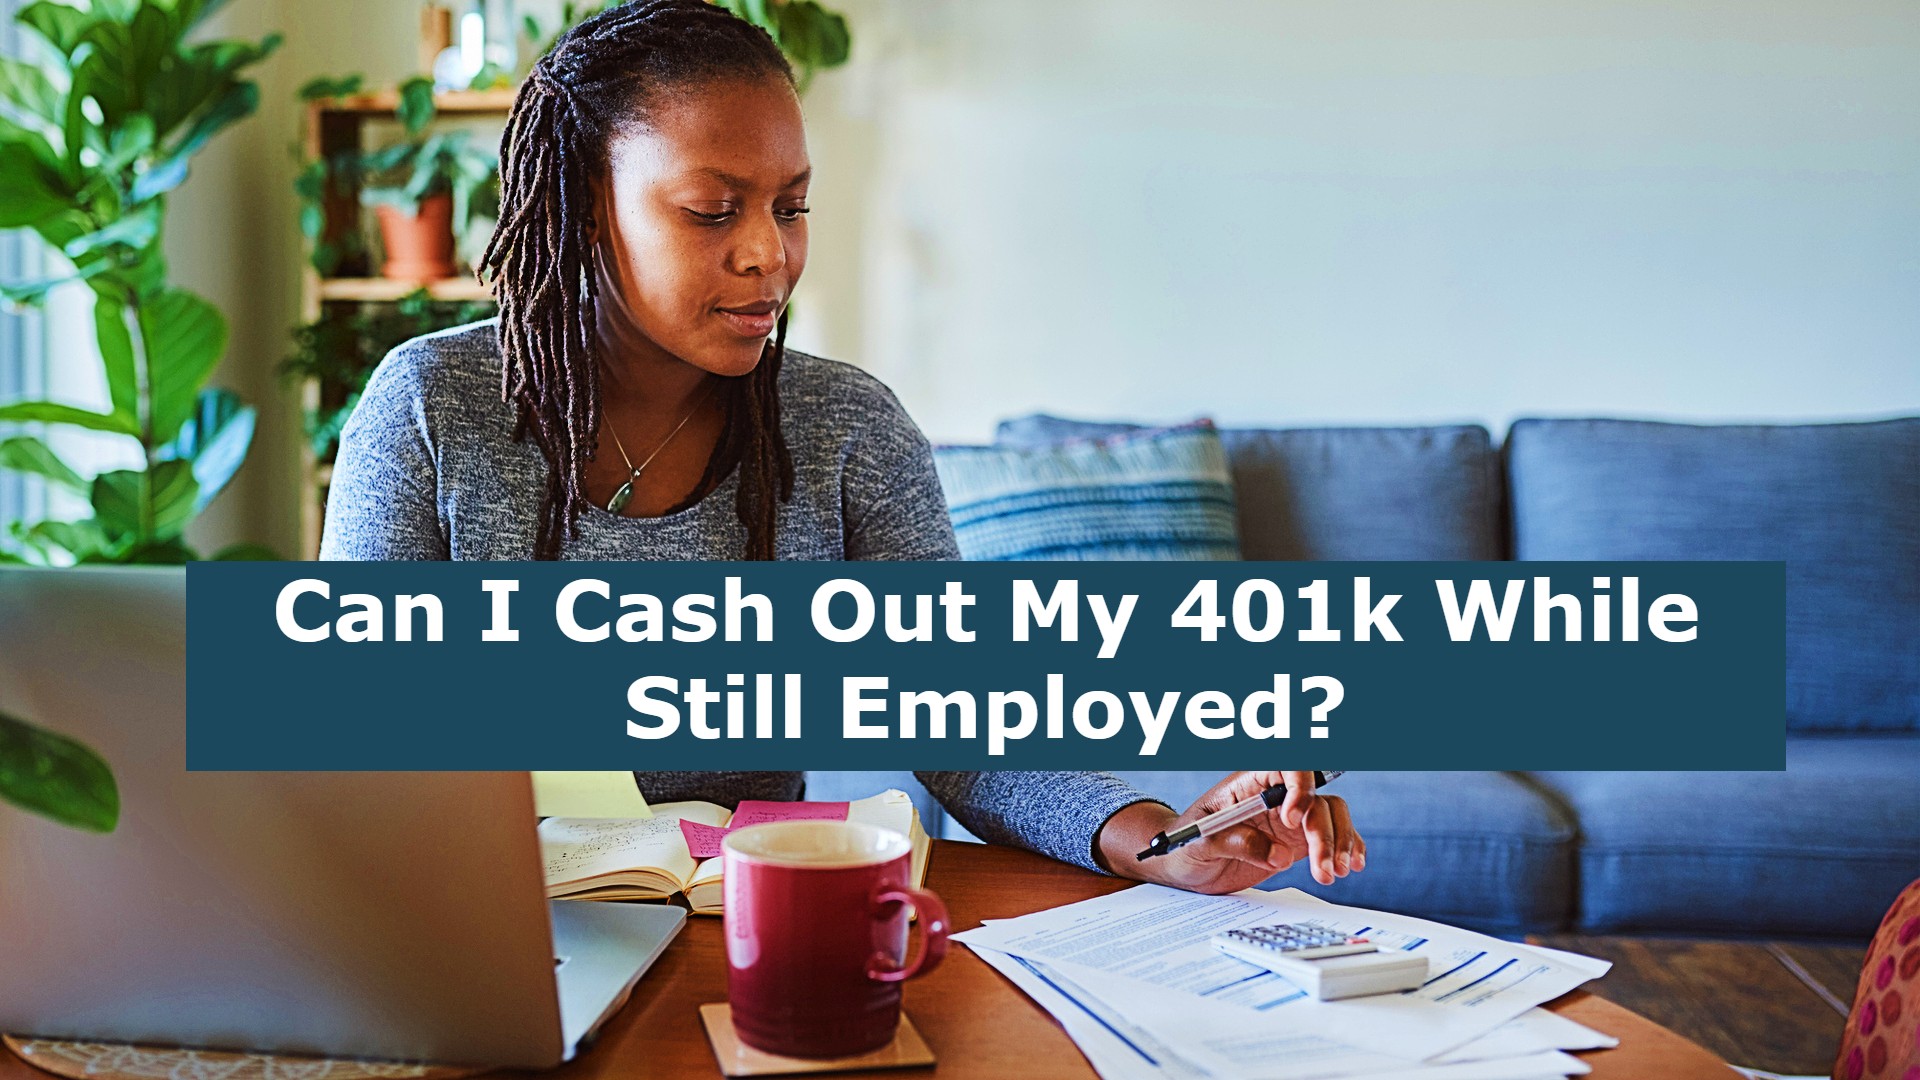 Can I Cash Out My 401k While Still Employed?